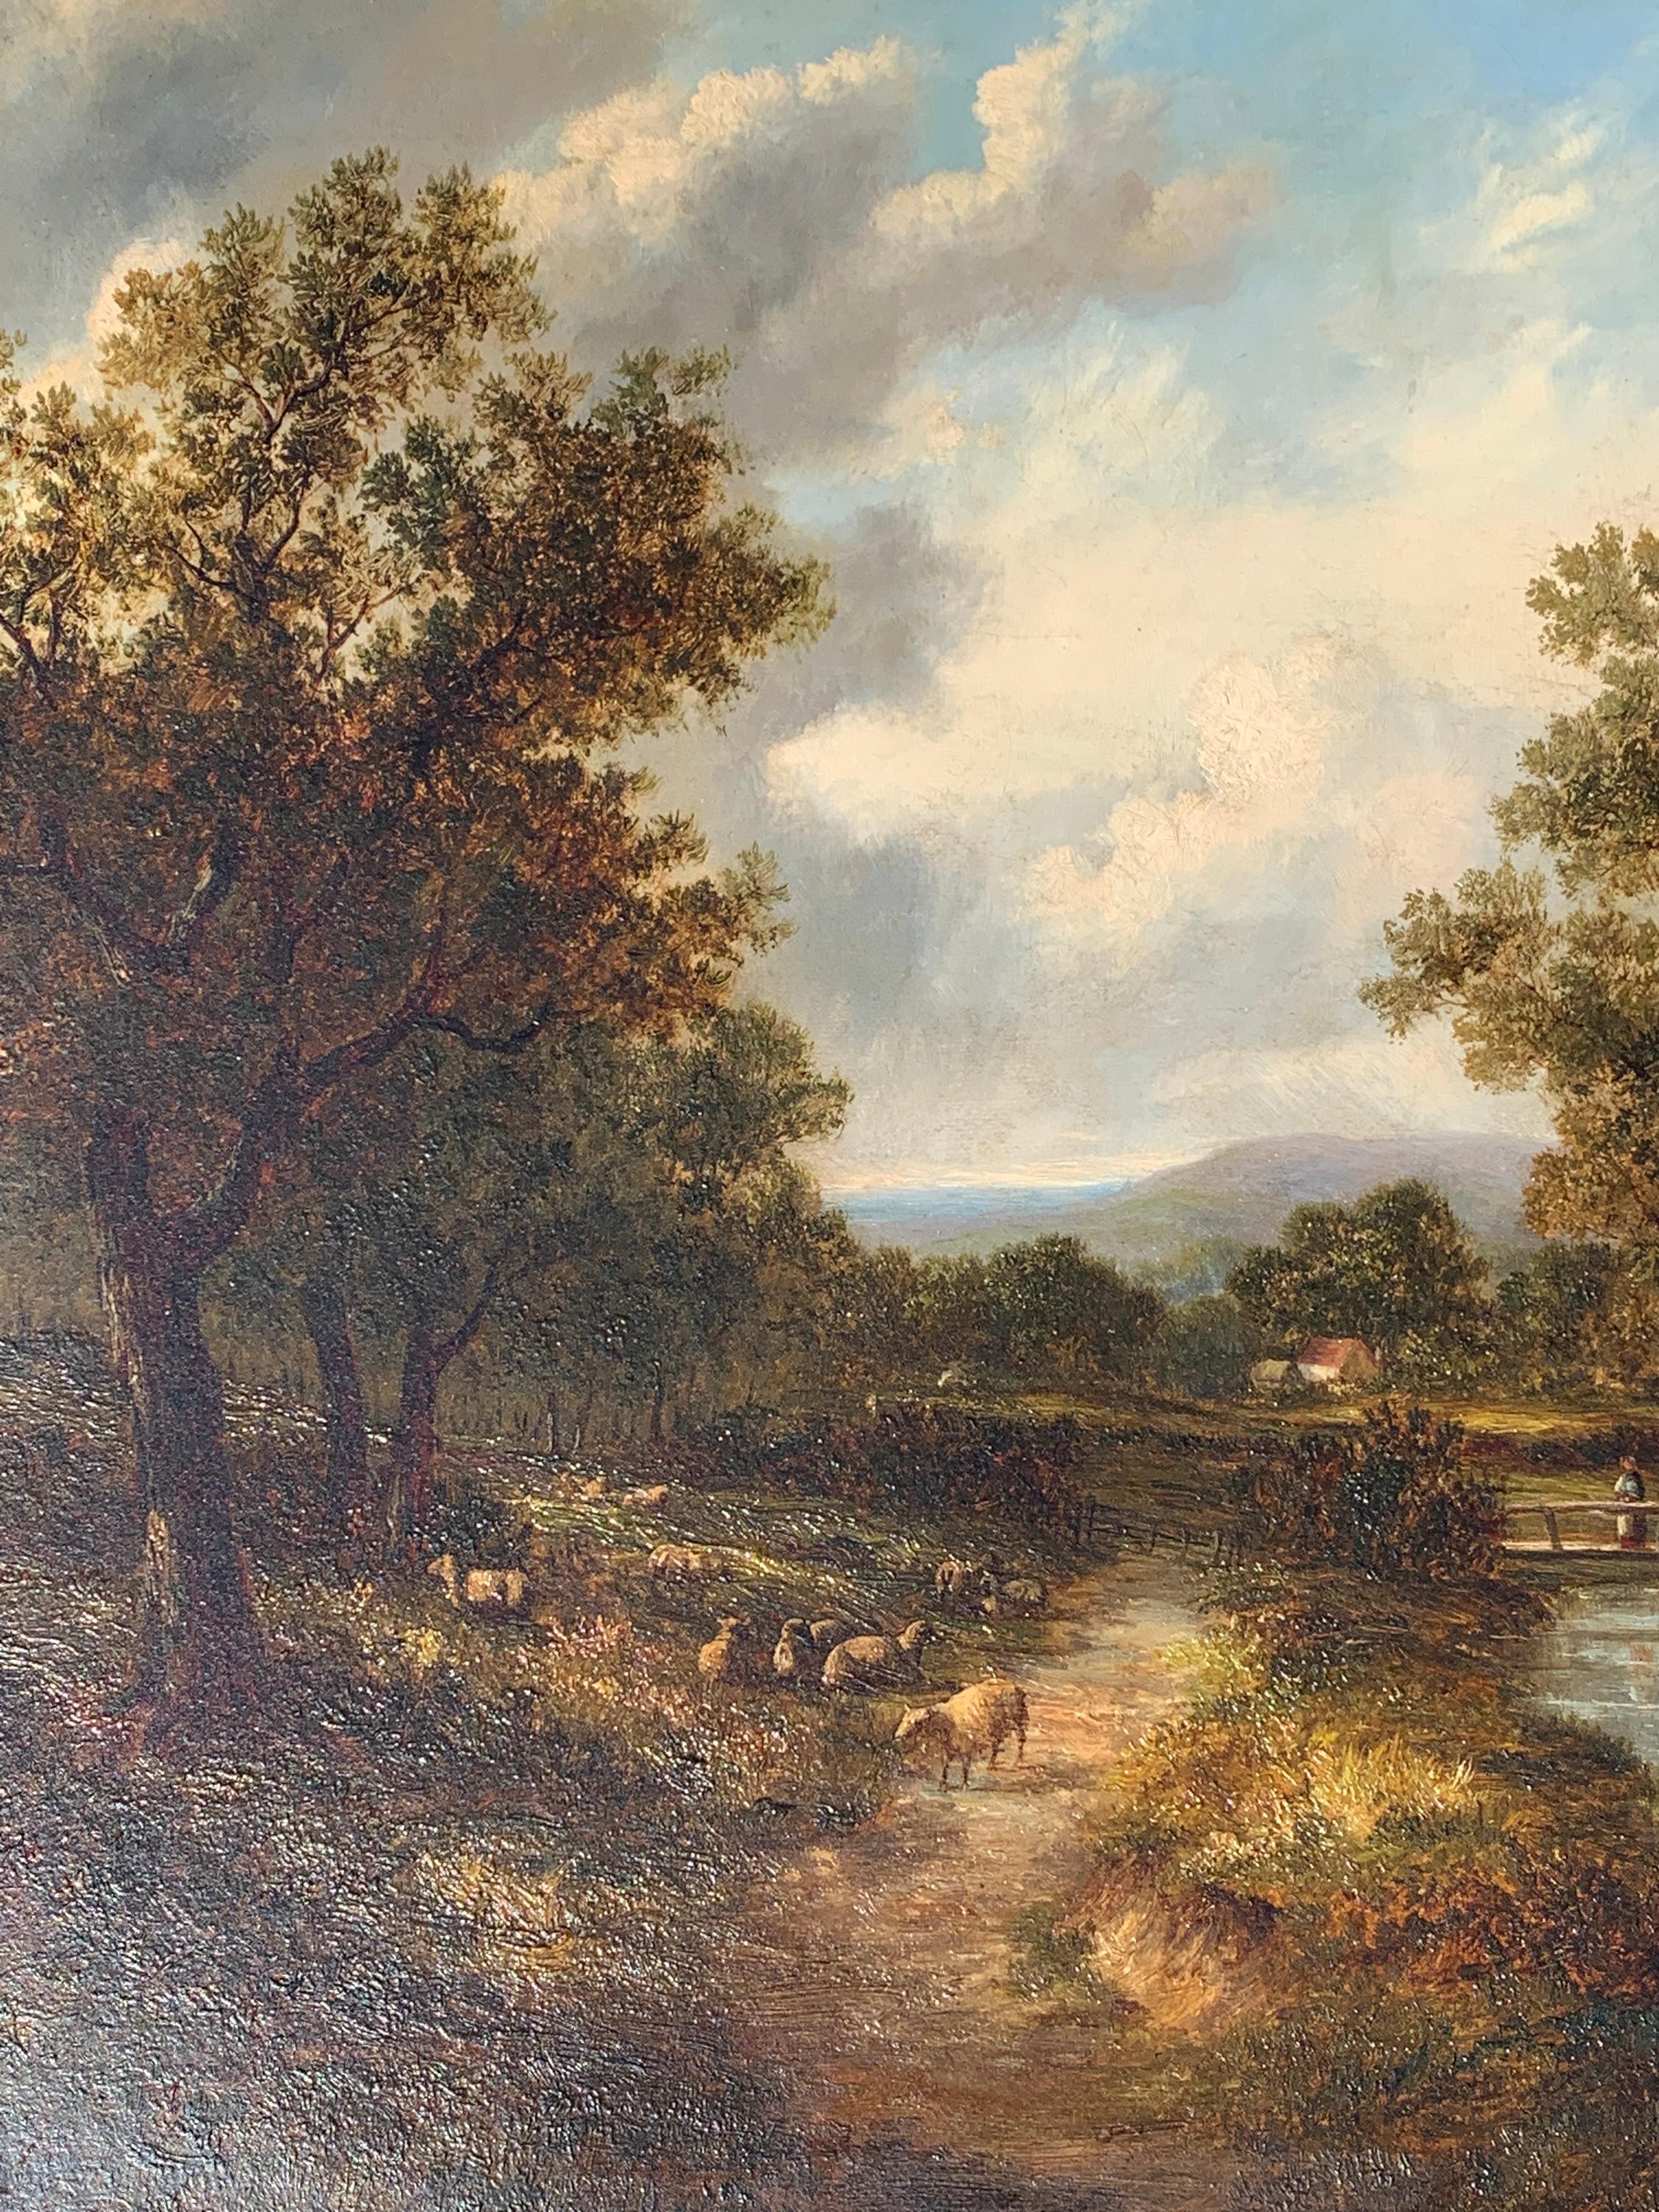 Joseph Thors was a landscape painter who lived in London but also painted in the Midlands, where he is regarded as a member of the Birmingham School. His landscapes are mainly rustic cottages, figures and animals, painted in a style similar to that